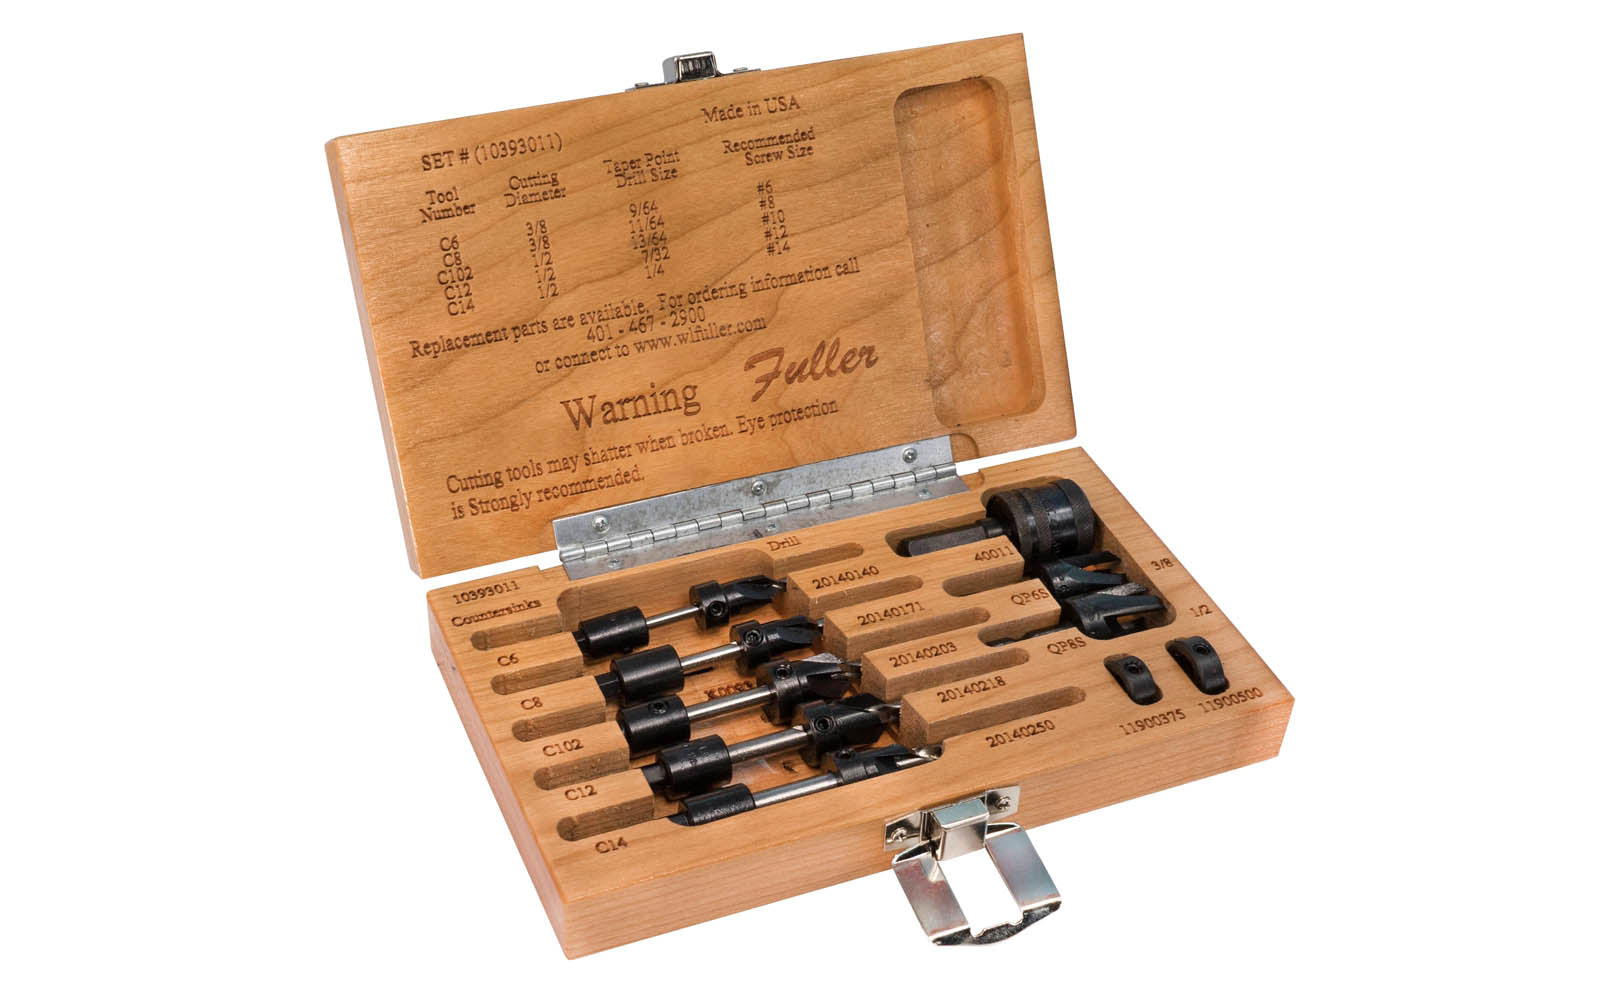 W.L. Fuller No. 11 Set - Model 10393011 - Combination countersink & quick change taper drill bit set with plug cutters, quick change adapter & stop collars. Designed for #6, #8, #10, #12, & #14 wood screws. Carbon steel & heat-treated. Four flute countersinks for clean & accurate boring. Hex Drill Bits. Made in USA